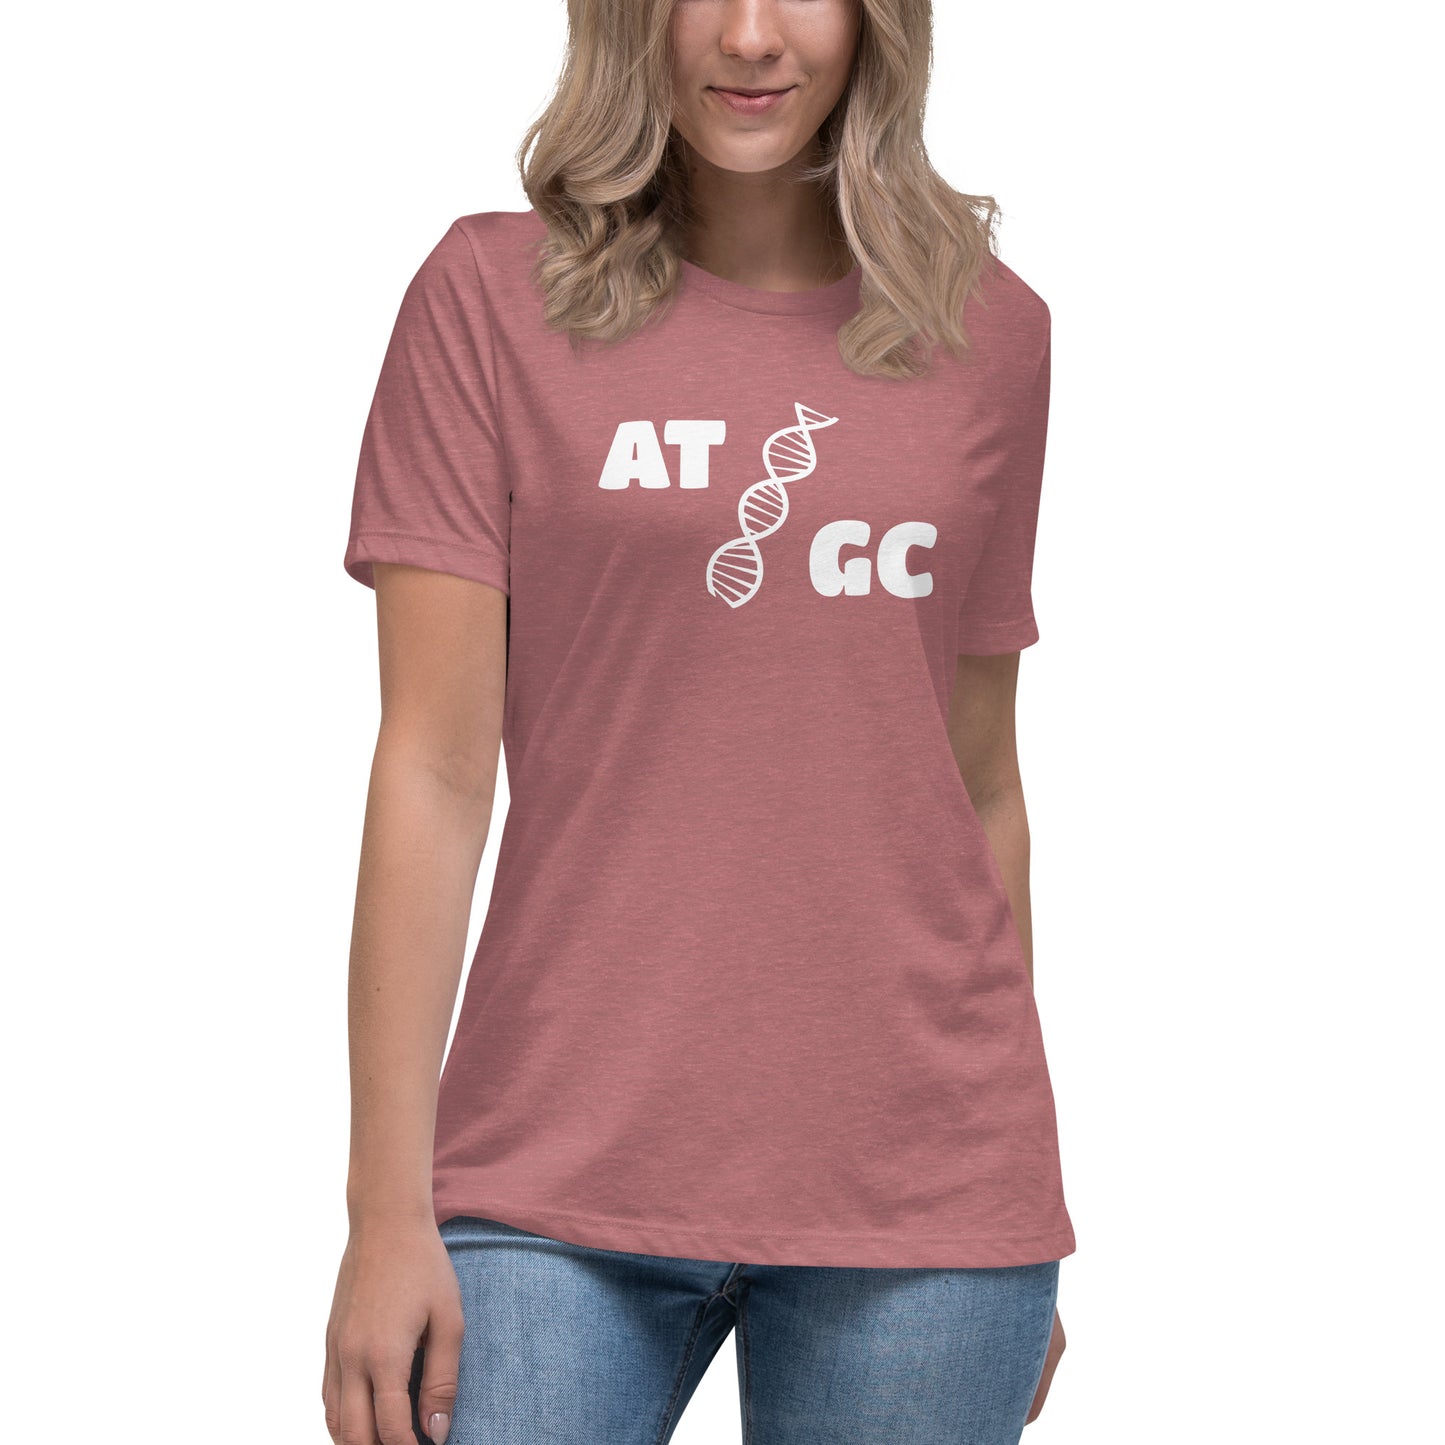 Women with mauve t-shirt with image of a DNA string and the text "ATGC"